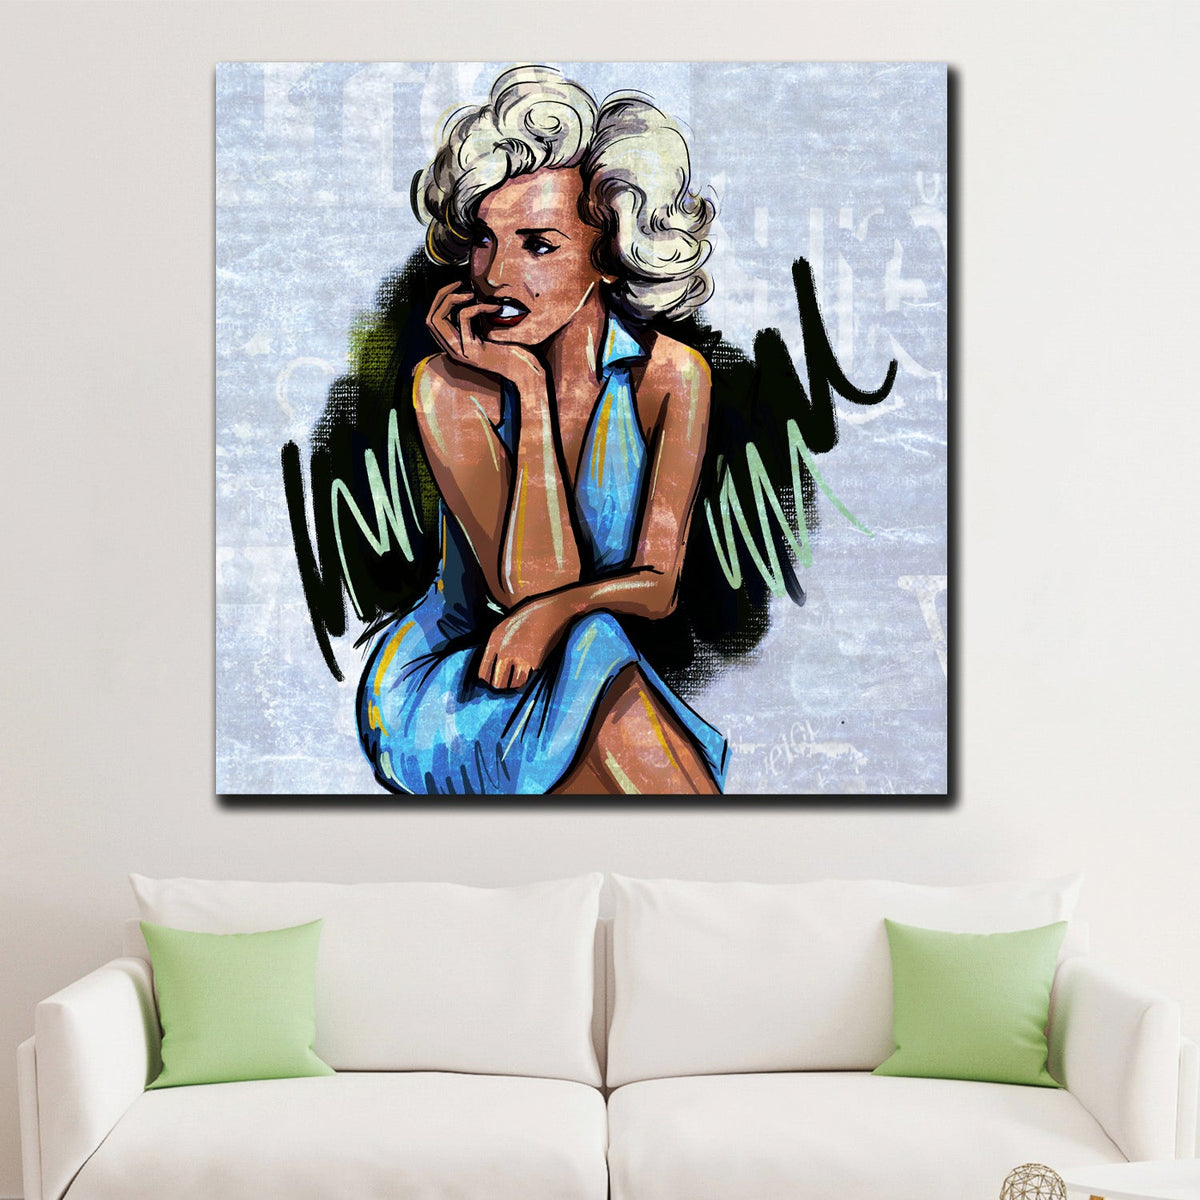 https://cdn.shopify.com/s/files/1/0387/9986/8044/products/MarilynMonroePin-UpCanvasArtprintStretched-2.jpg